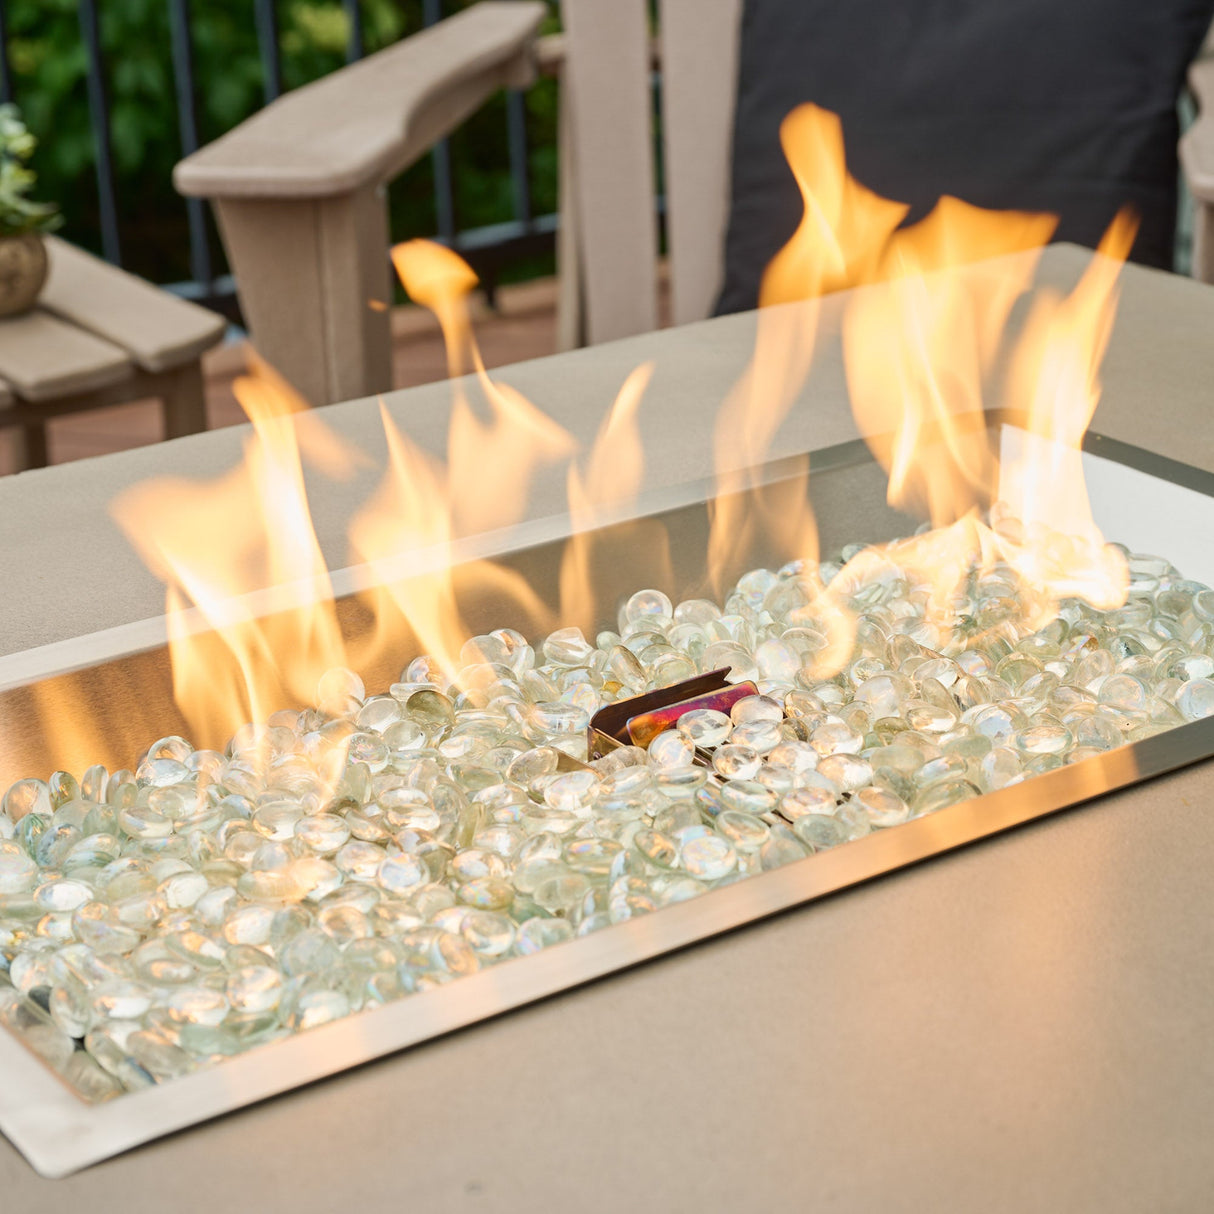 A close up view of the burner and flame from a Havenwood Rectangular Gas Fire Pit Table